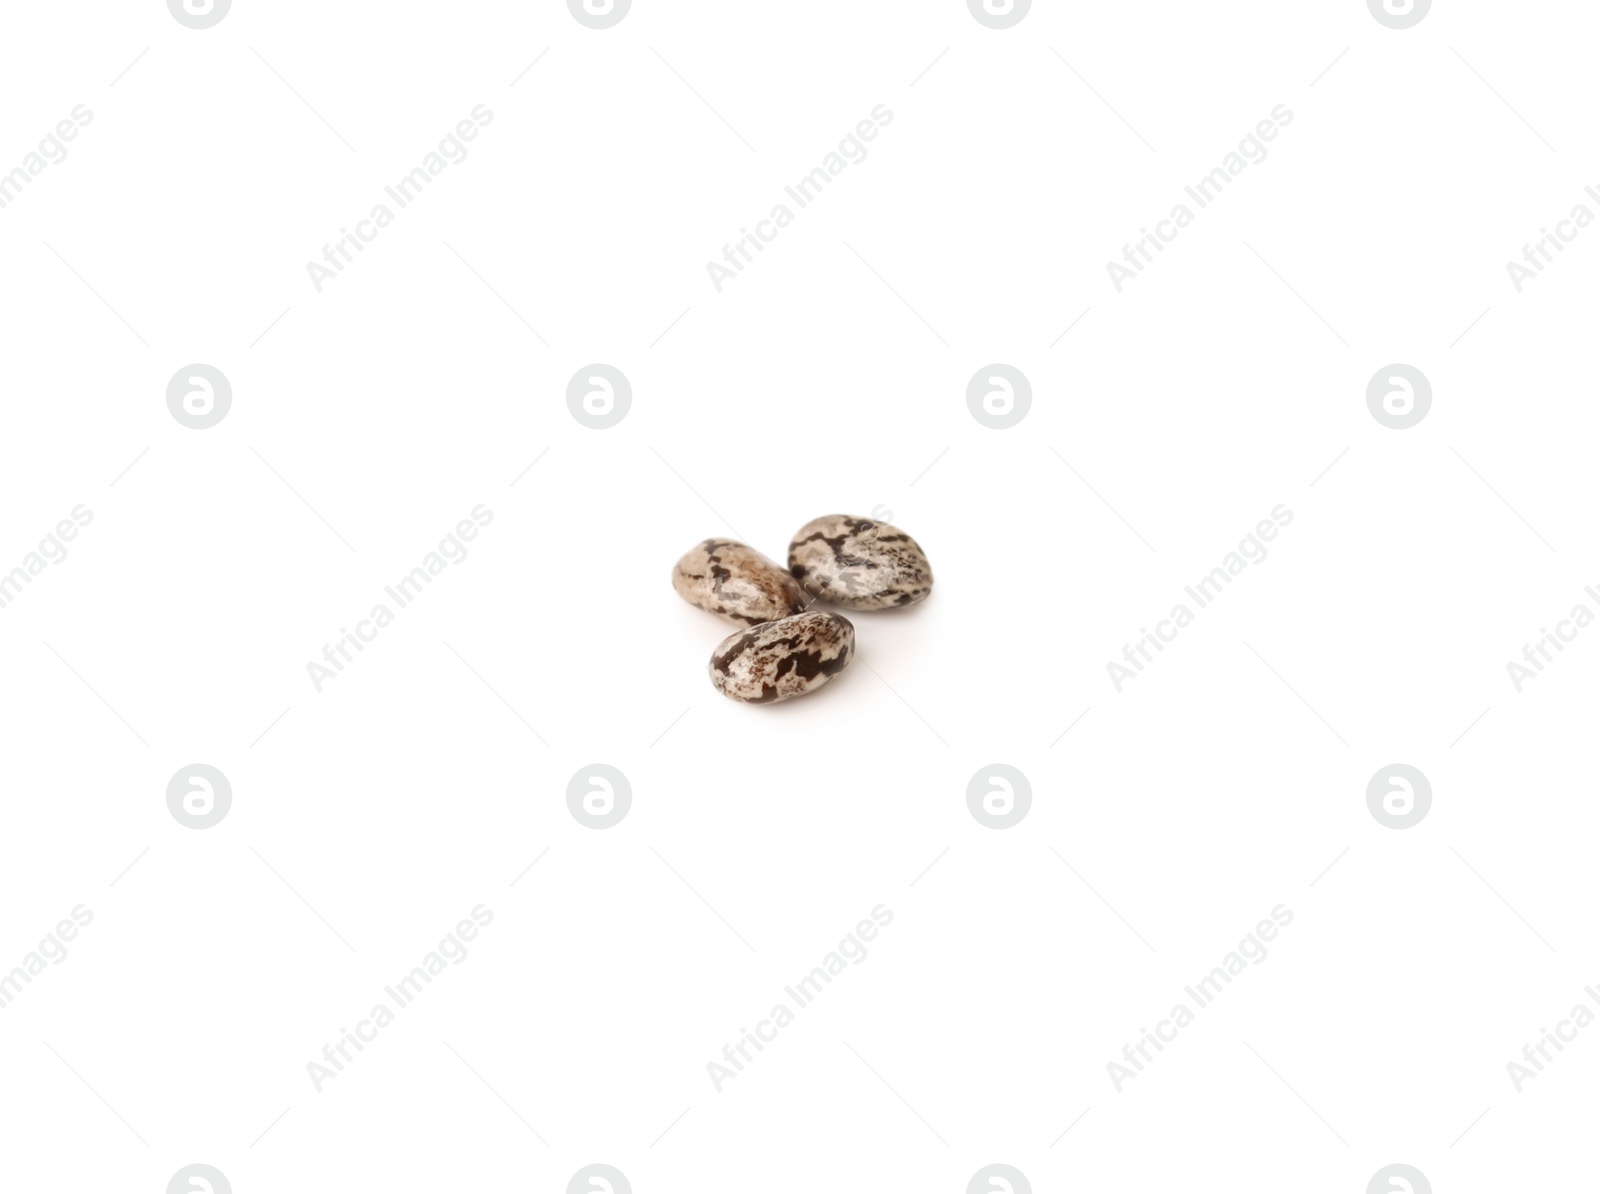 Photo of Pile of chia seeds on white background. Vegetable planting